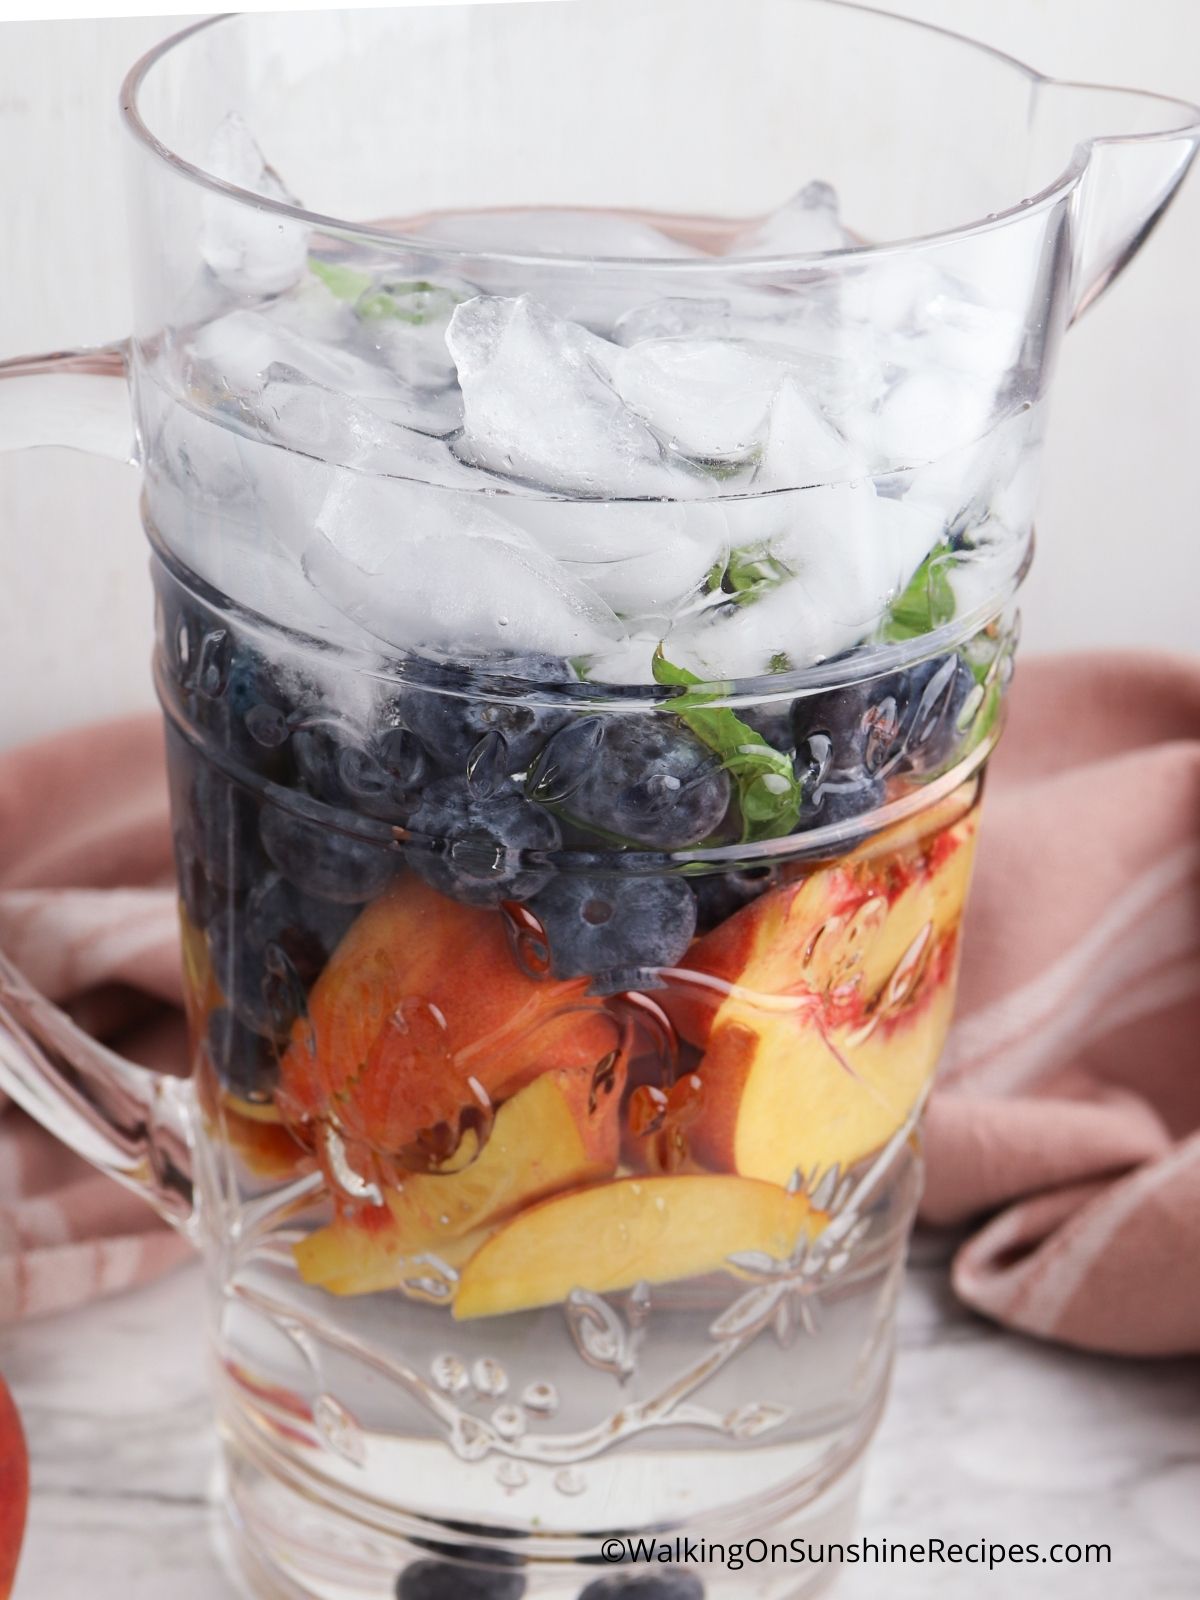 Add ice and water to pitcher with fruit.